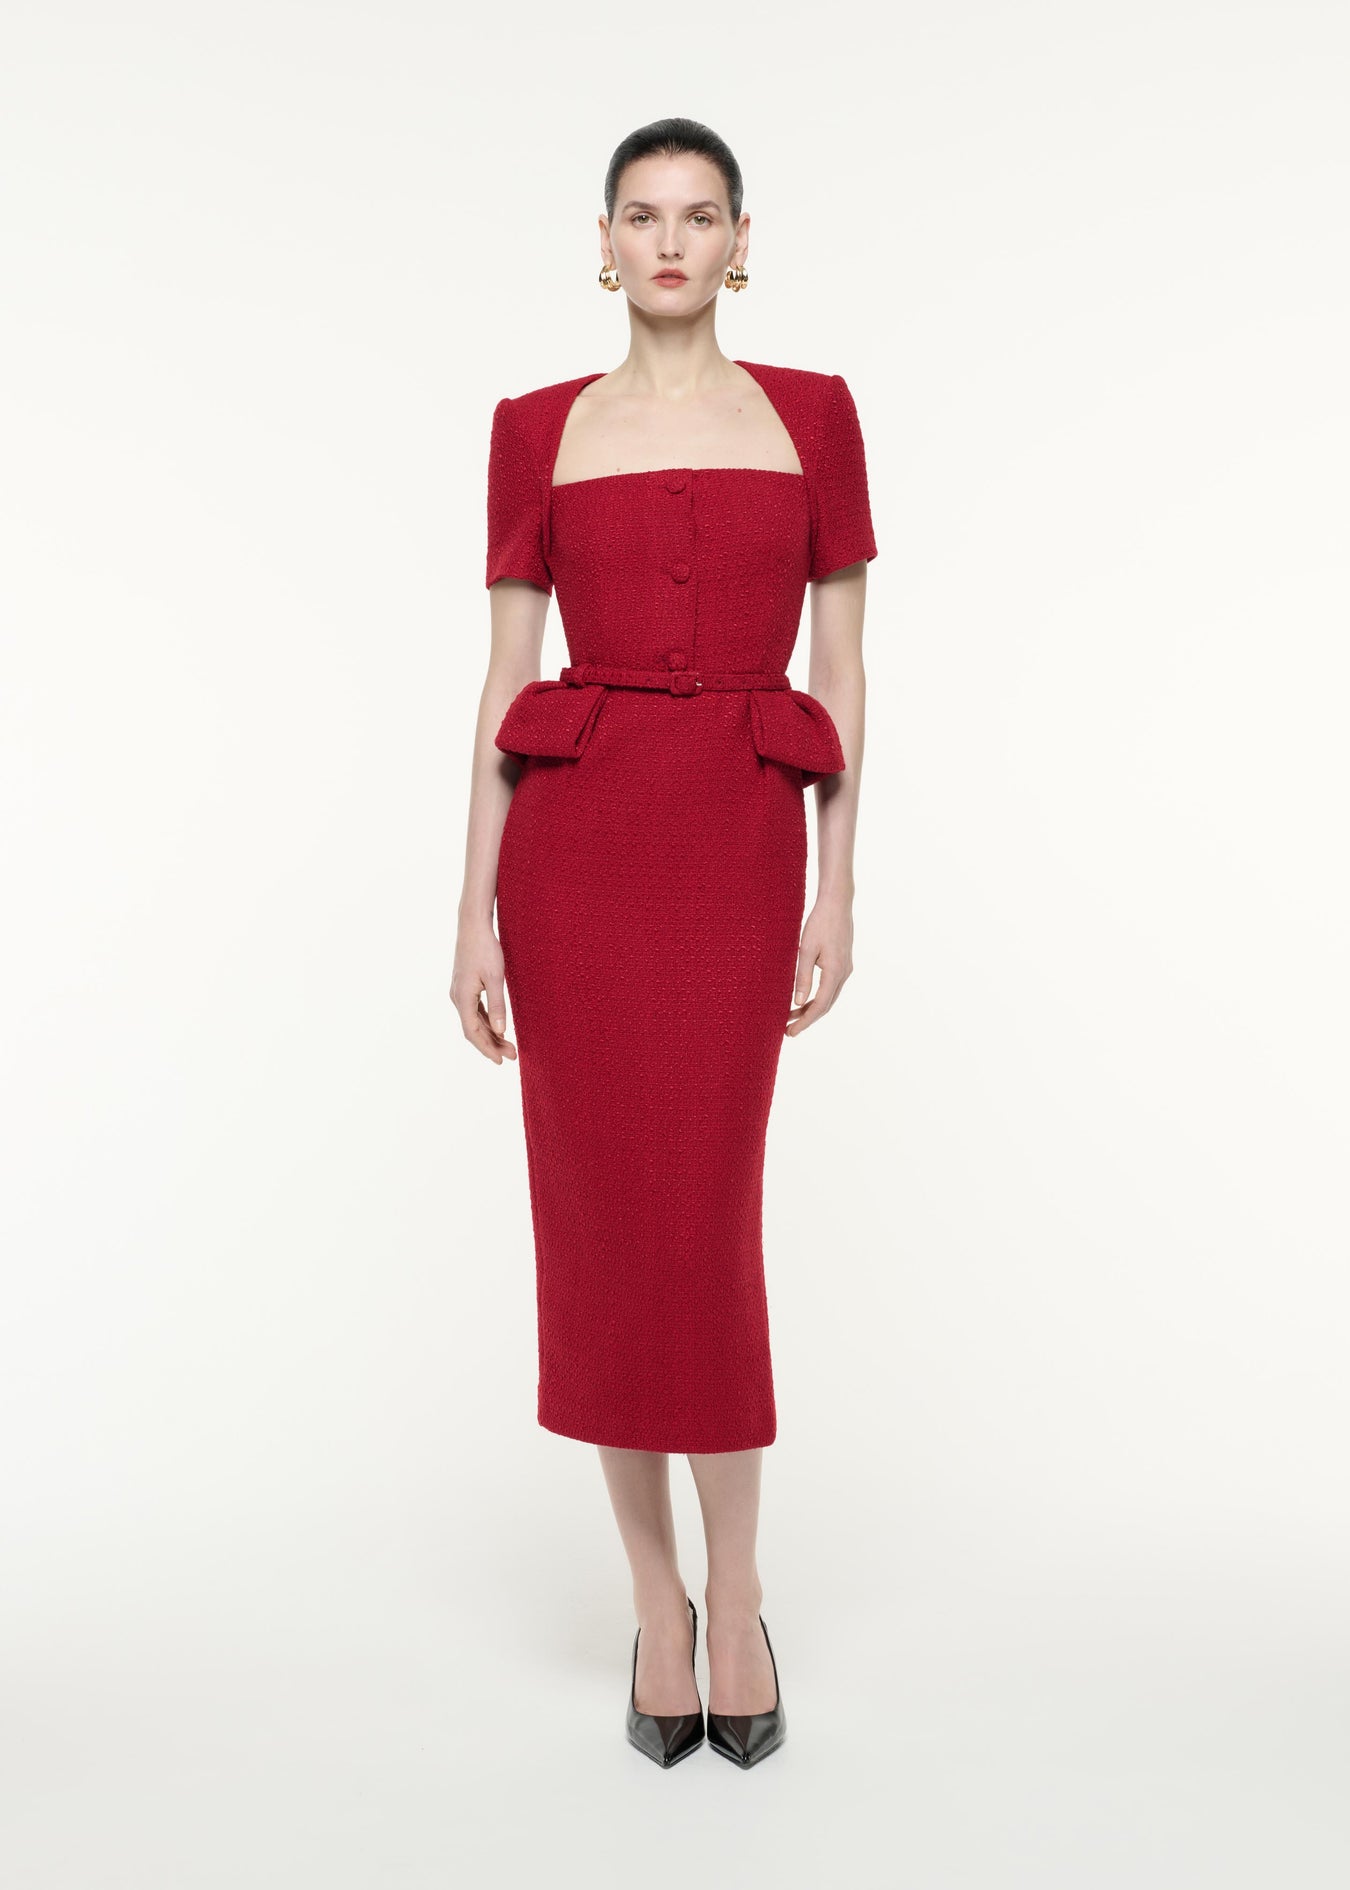 A front view image of a model wearing the Short Sleeve Boucle Midi Dress in Red